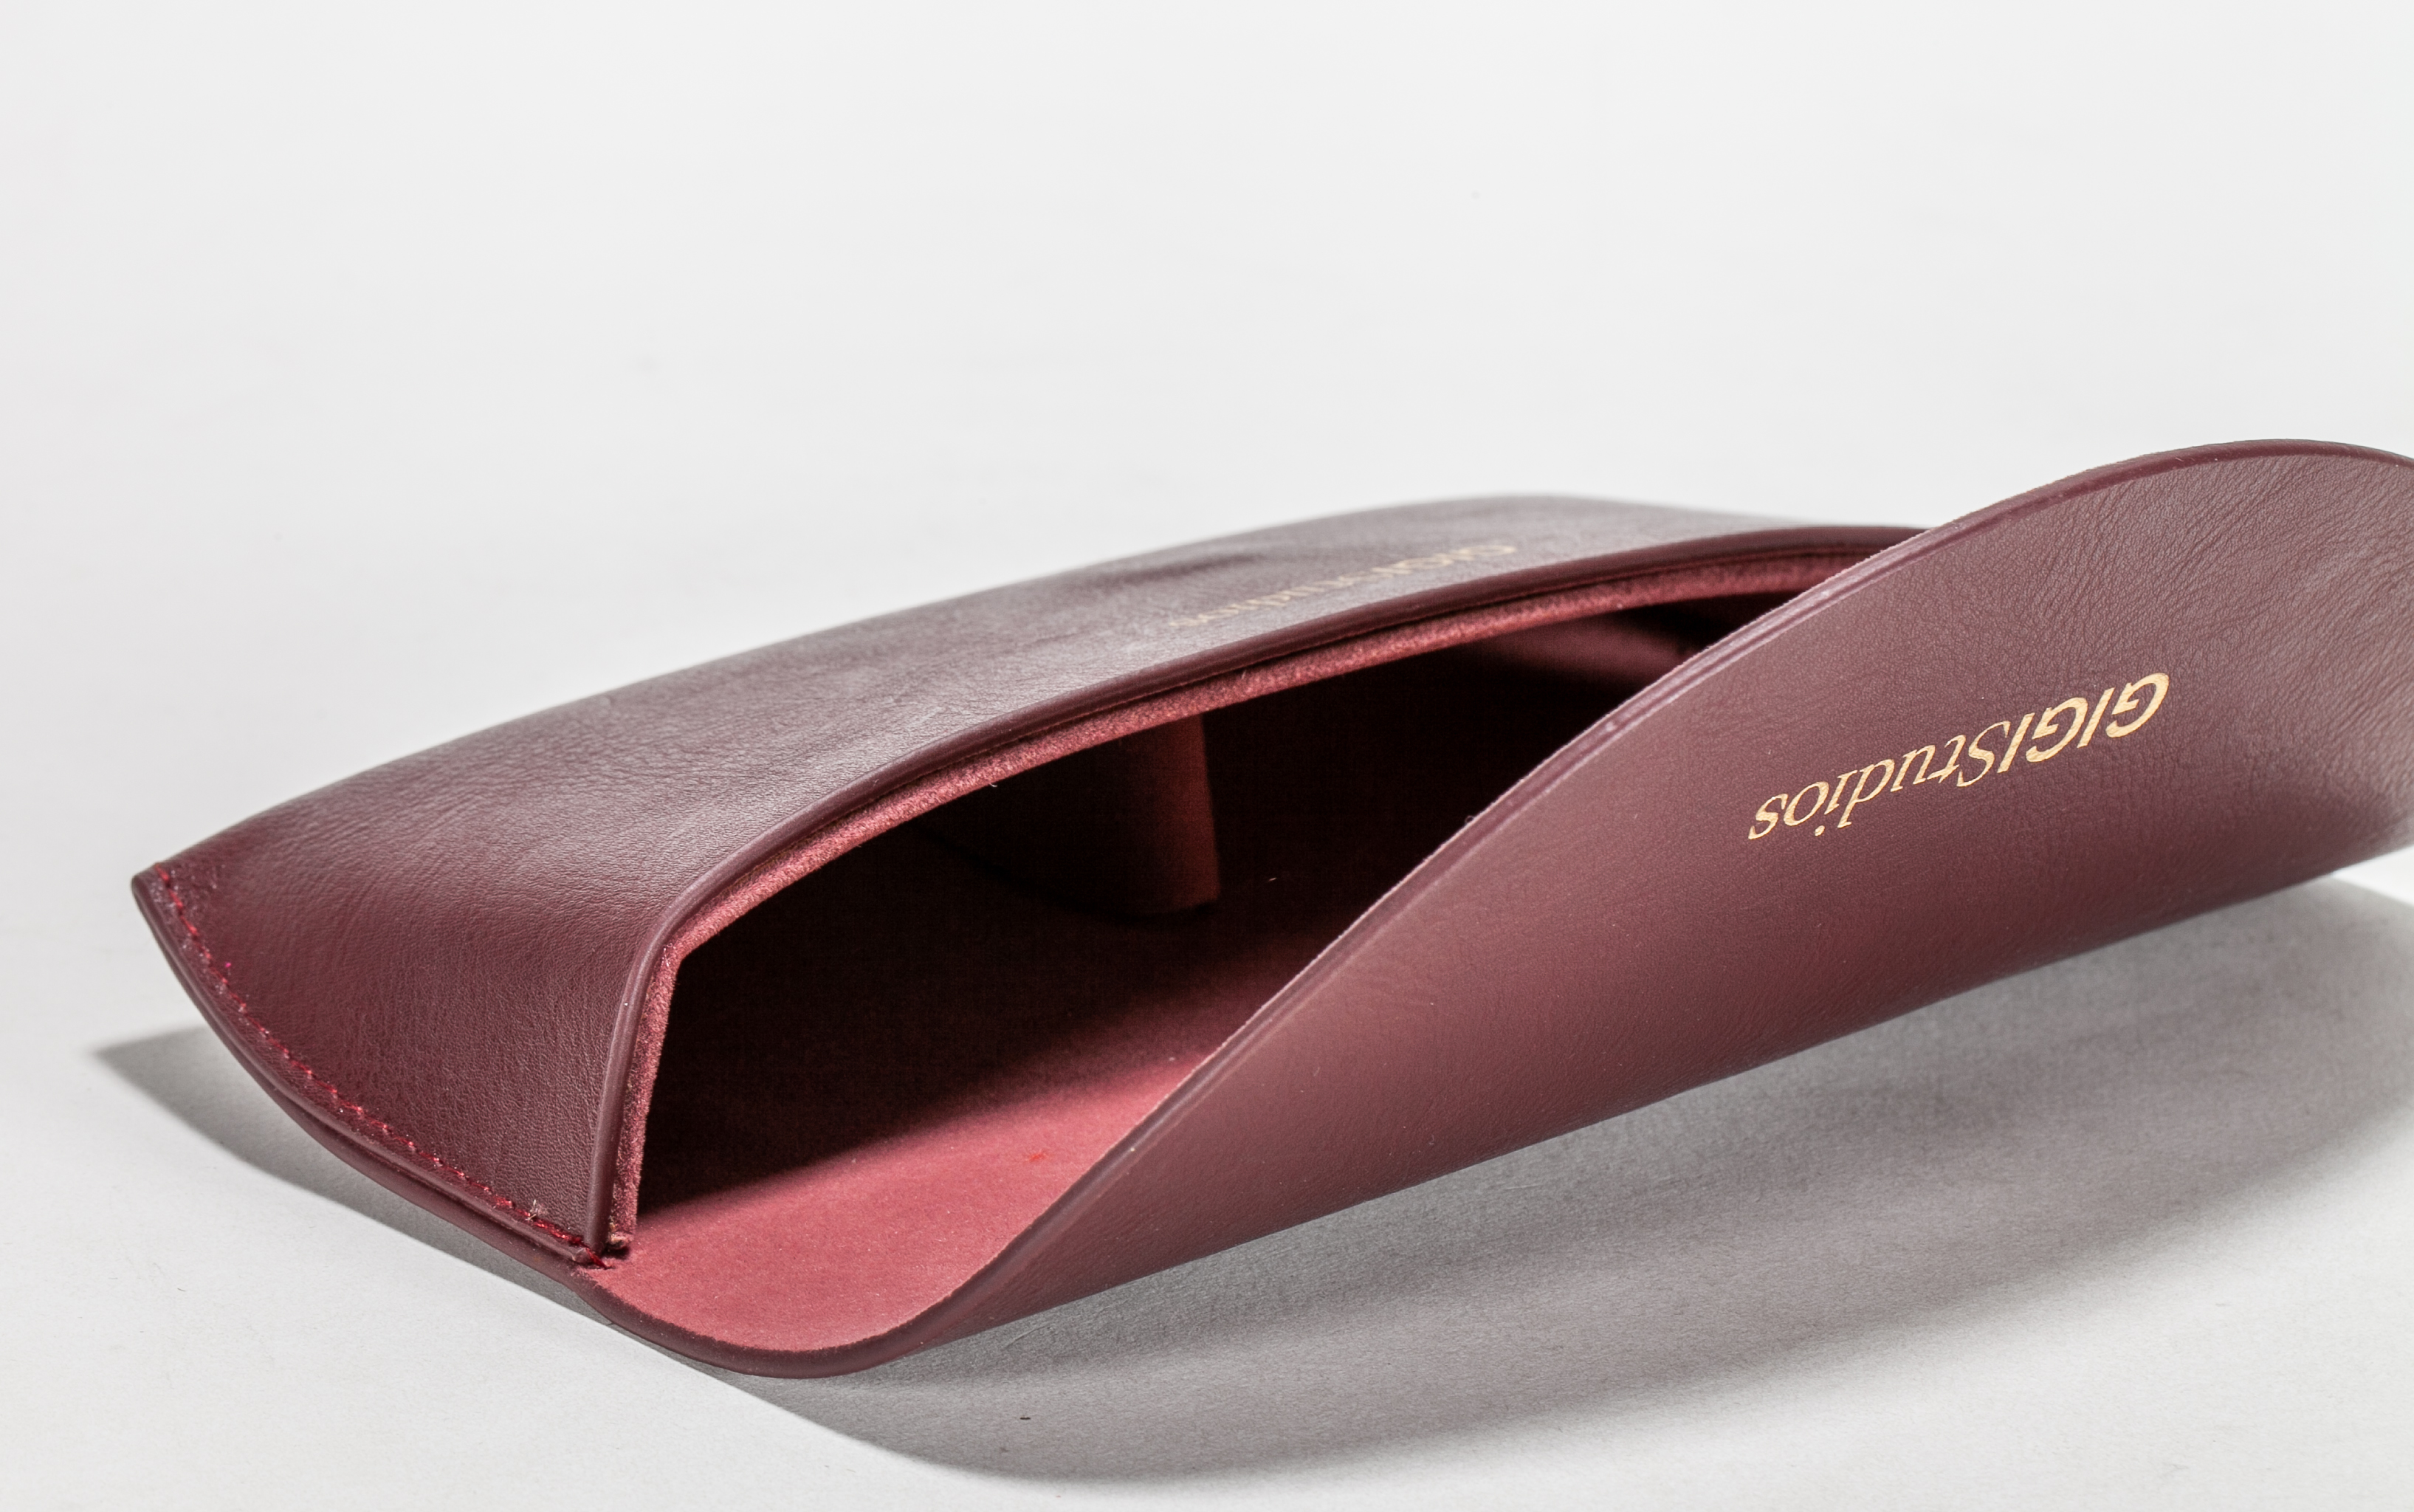 2021 sunglasses, Burgundy, logo-printed glasses case set, available in a variety of styles